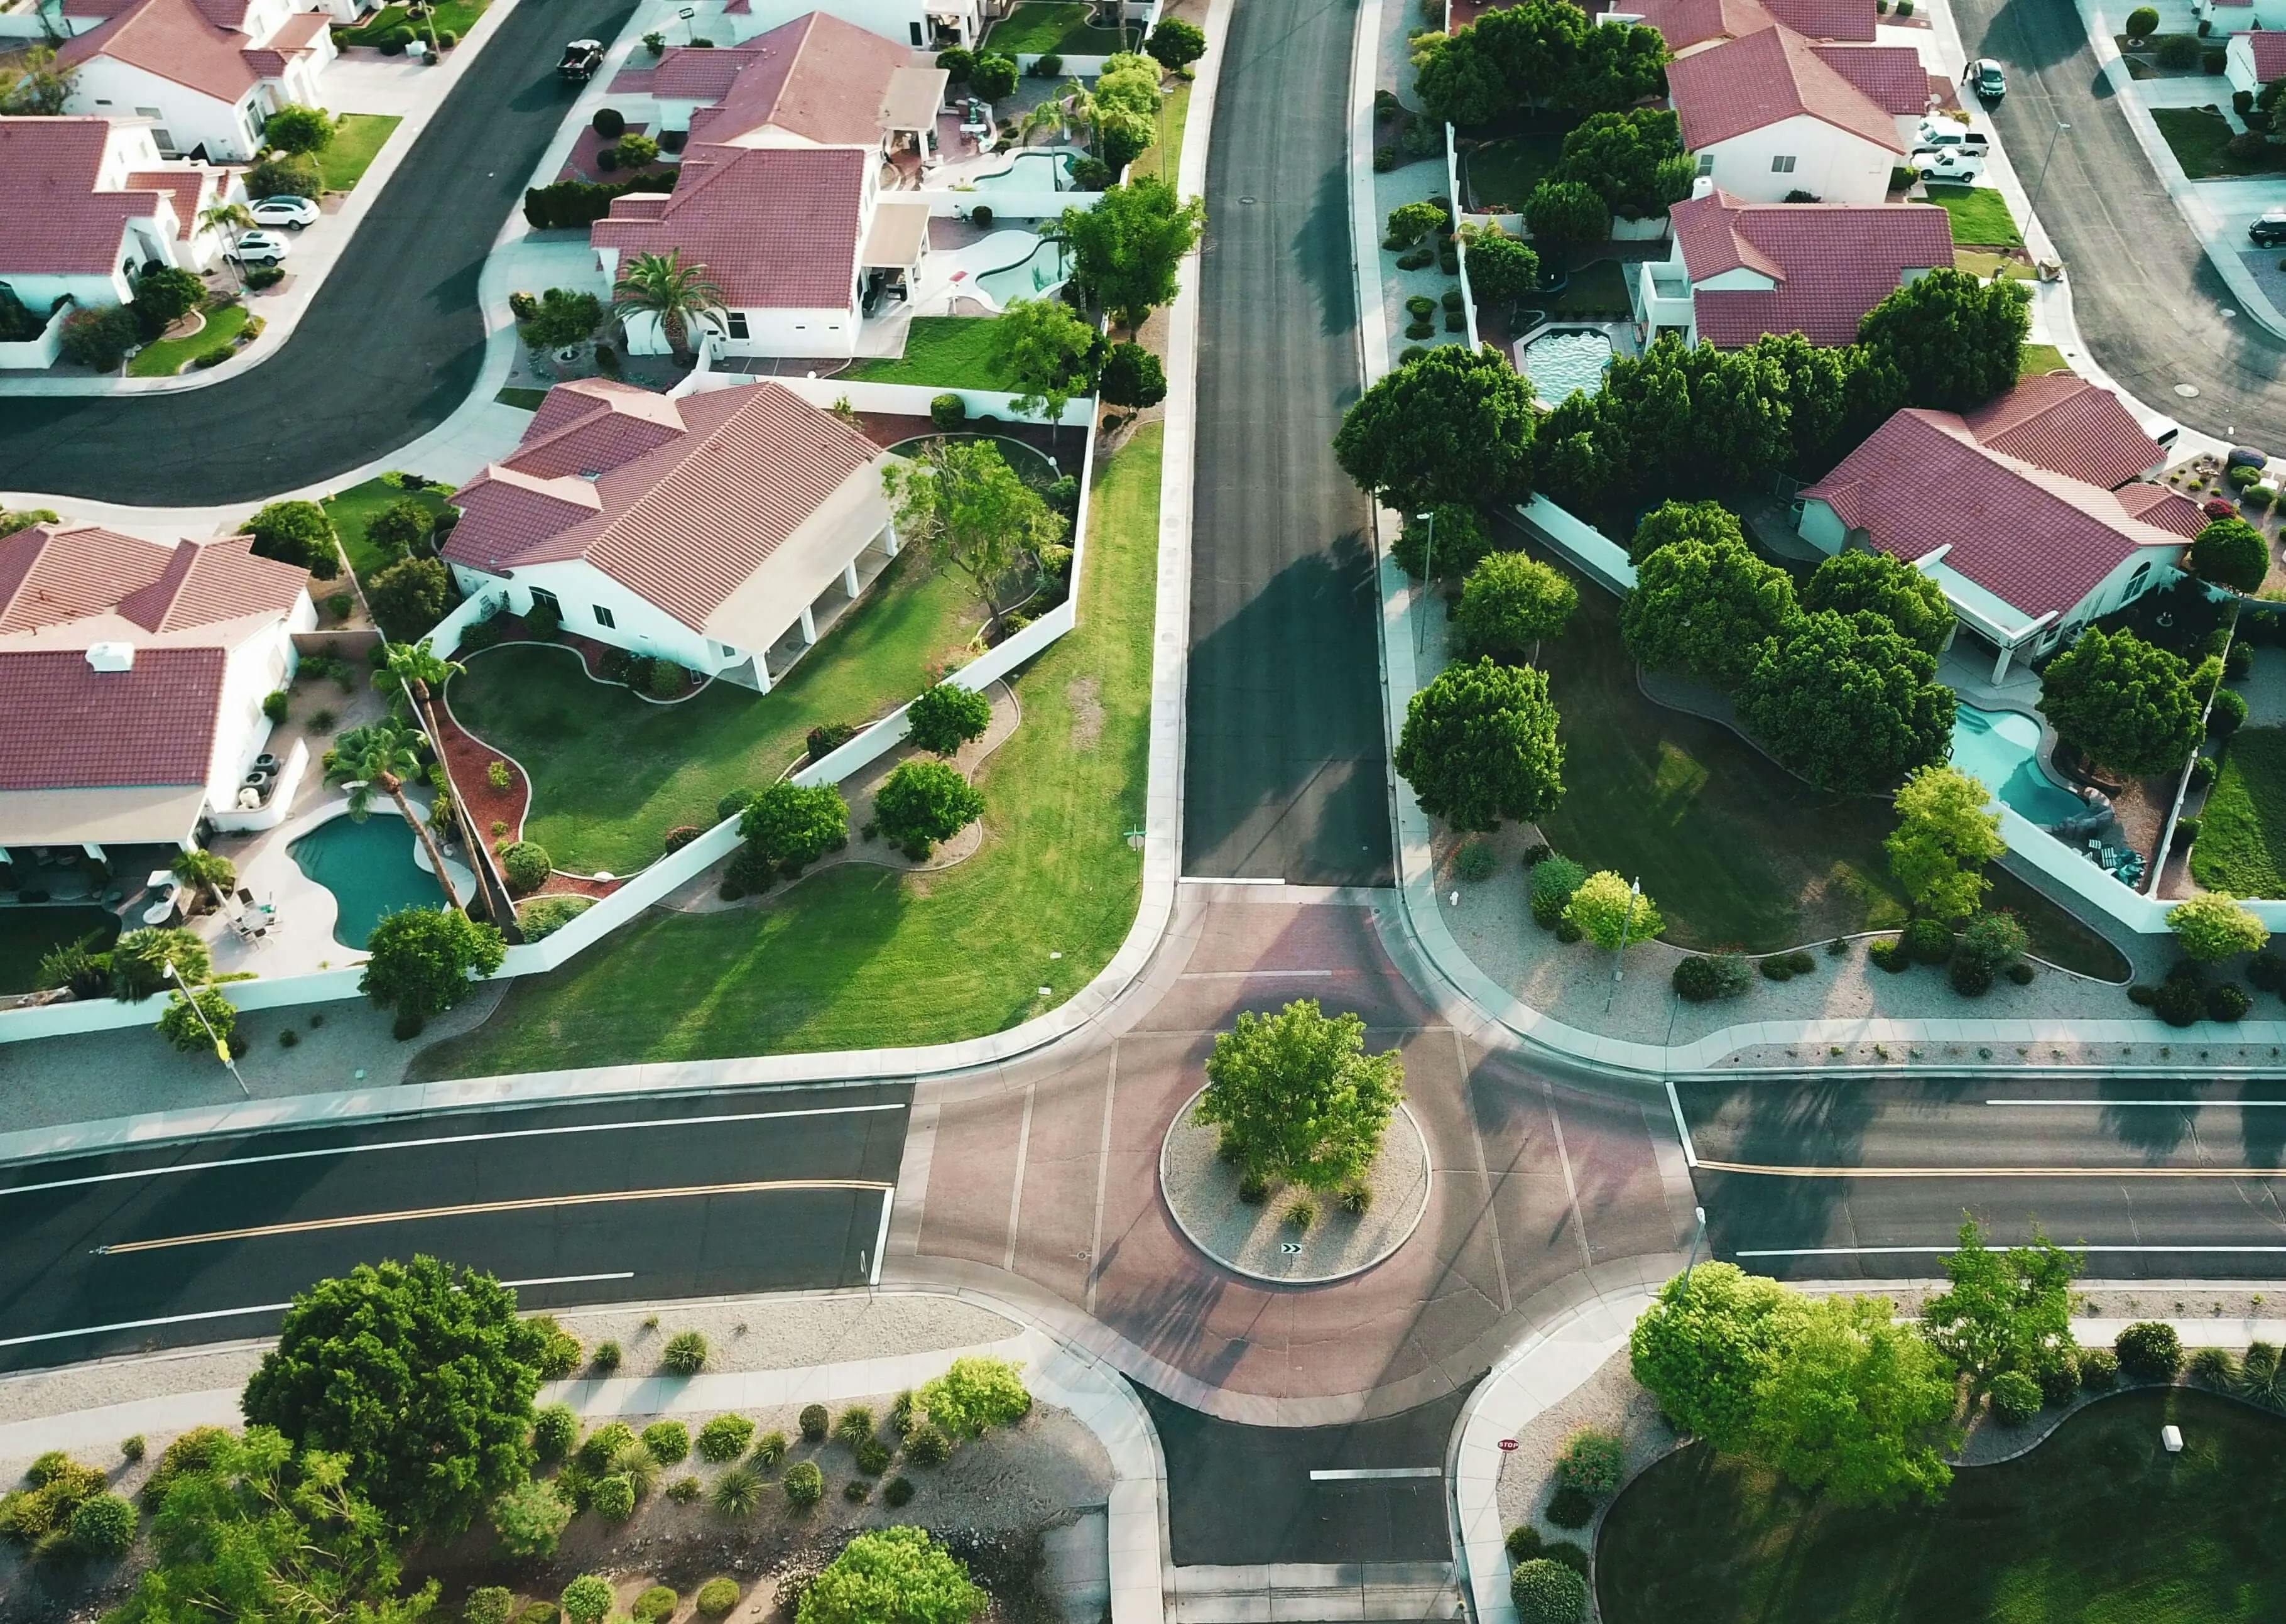 A bird's-eye view of a suburban community with houses, streets, and green spaces.